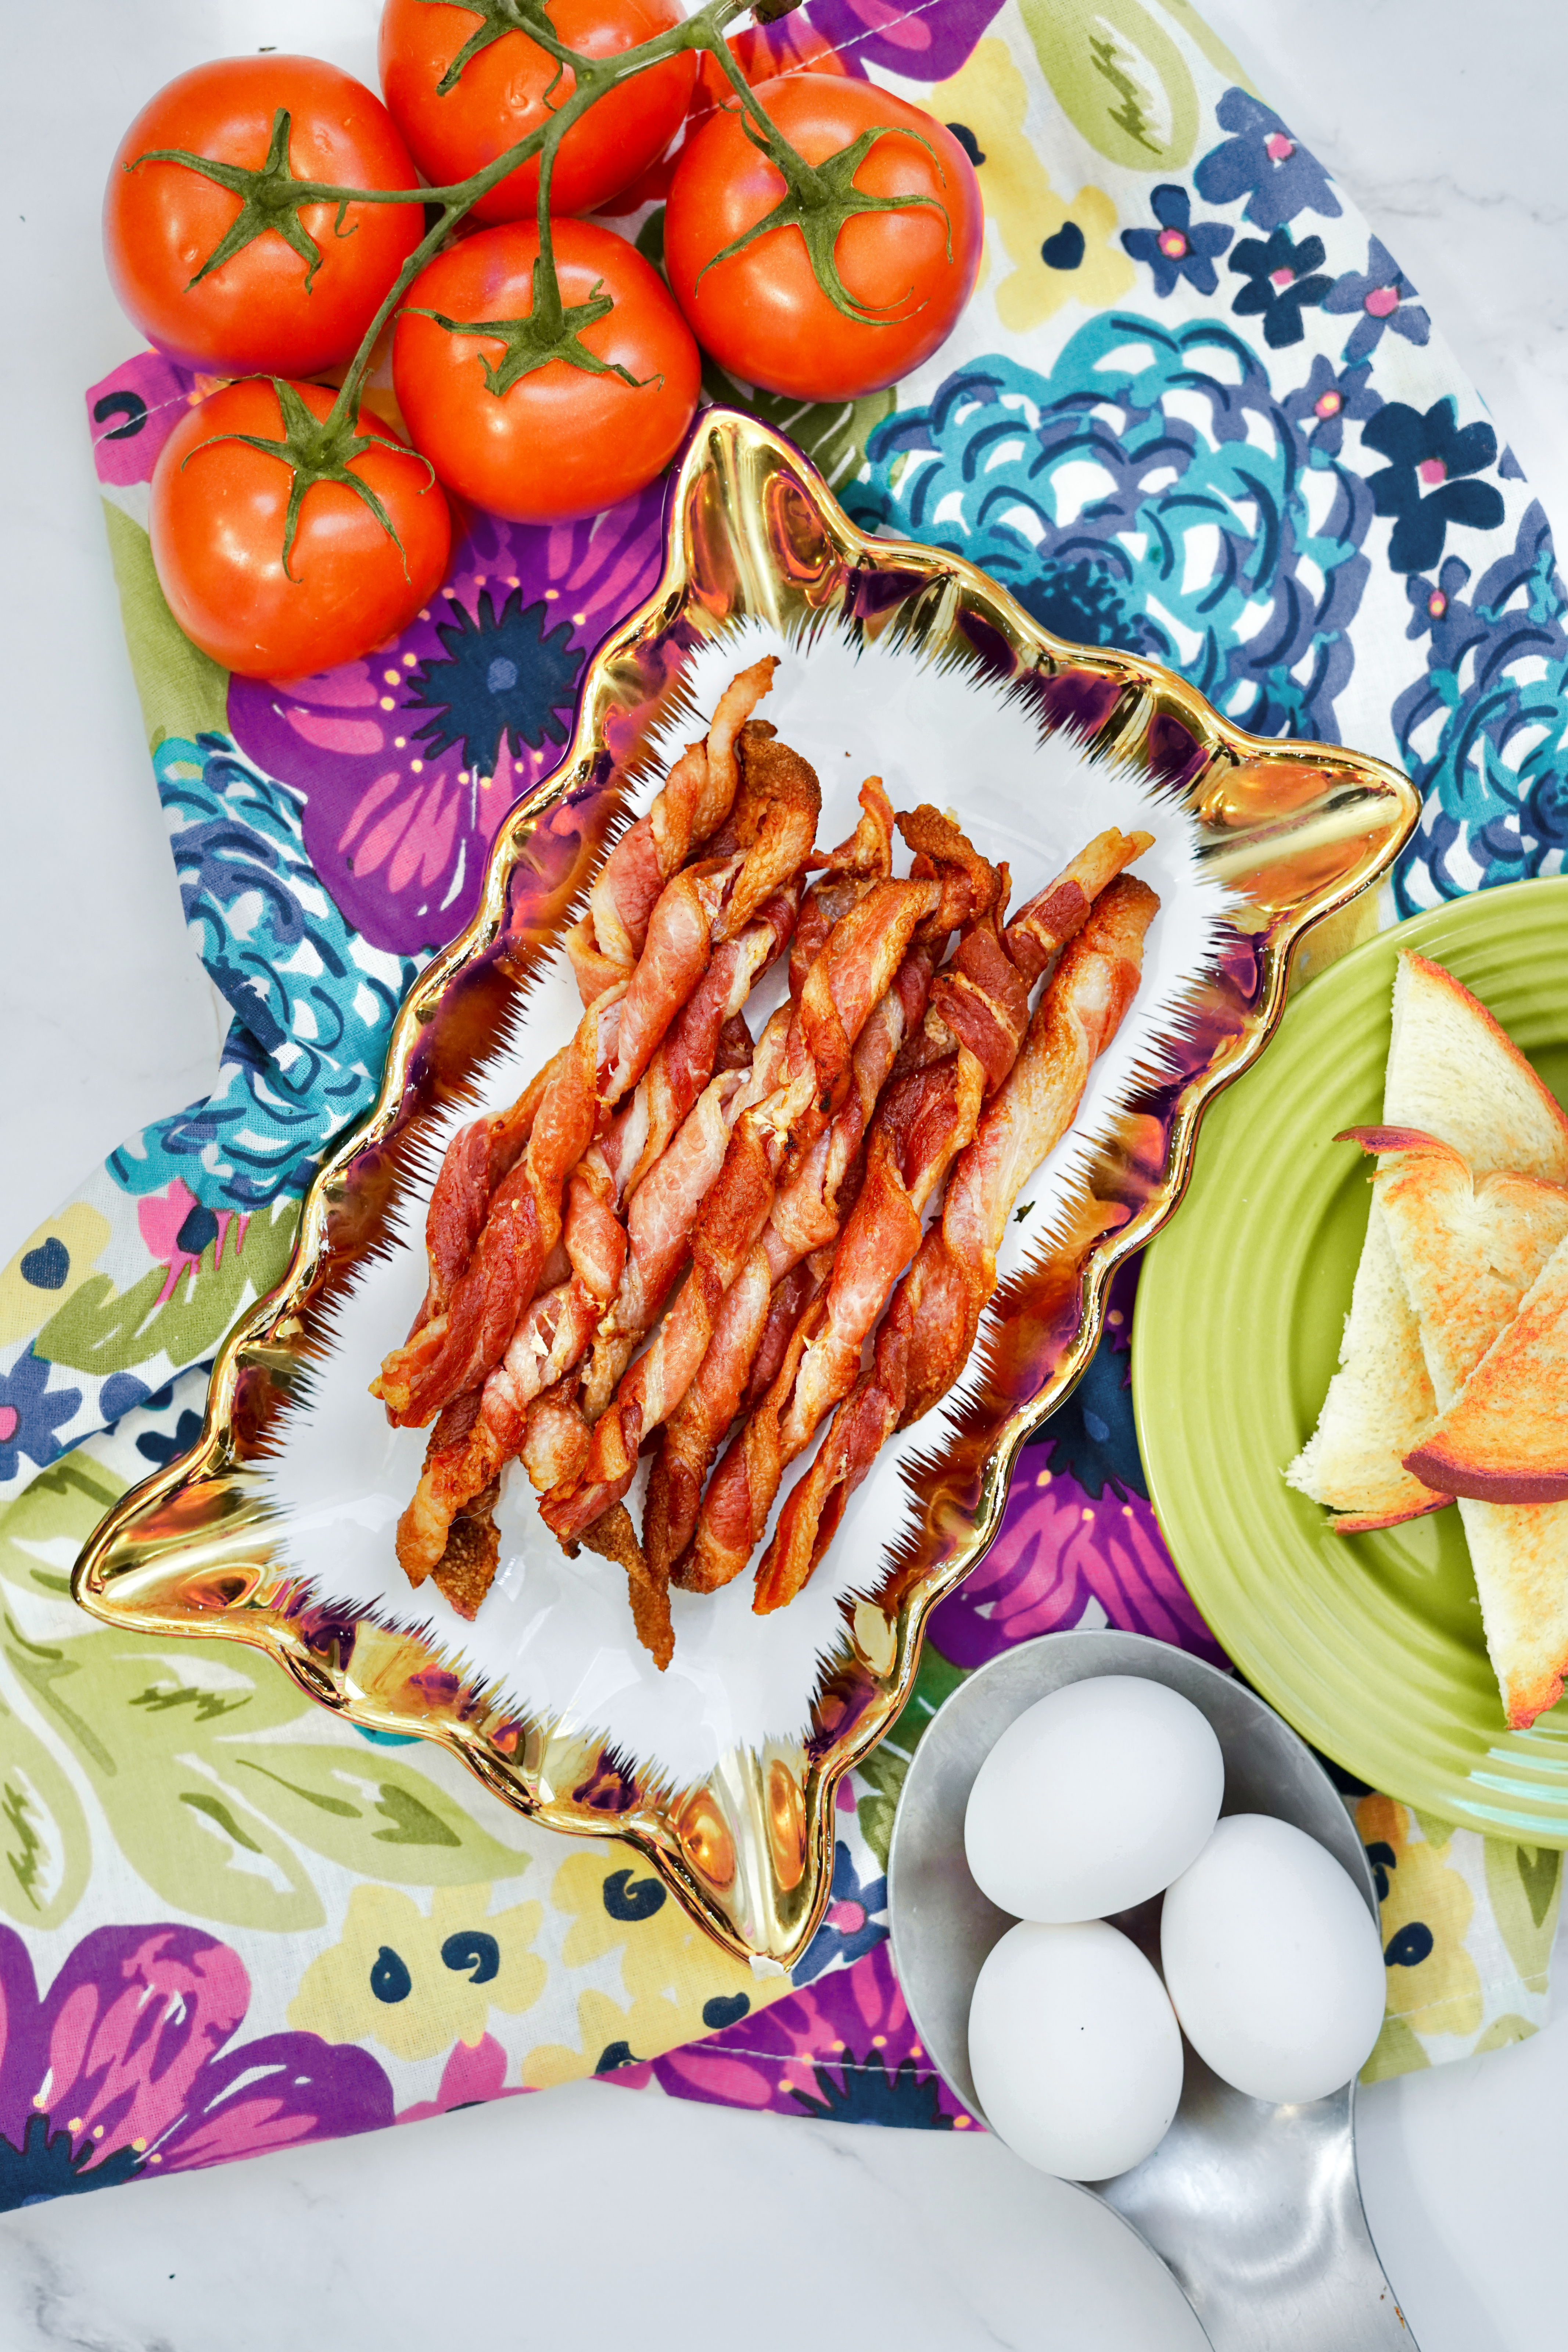 Platter of air fried bacon twists on a colorful tablecloth near tomatoes and eggs.Platter of air fried bacon twists on a colorful tablecloth near tomatoes and eggs.